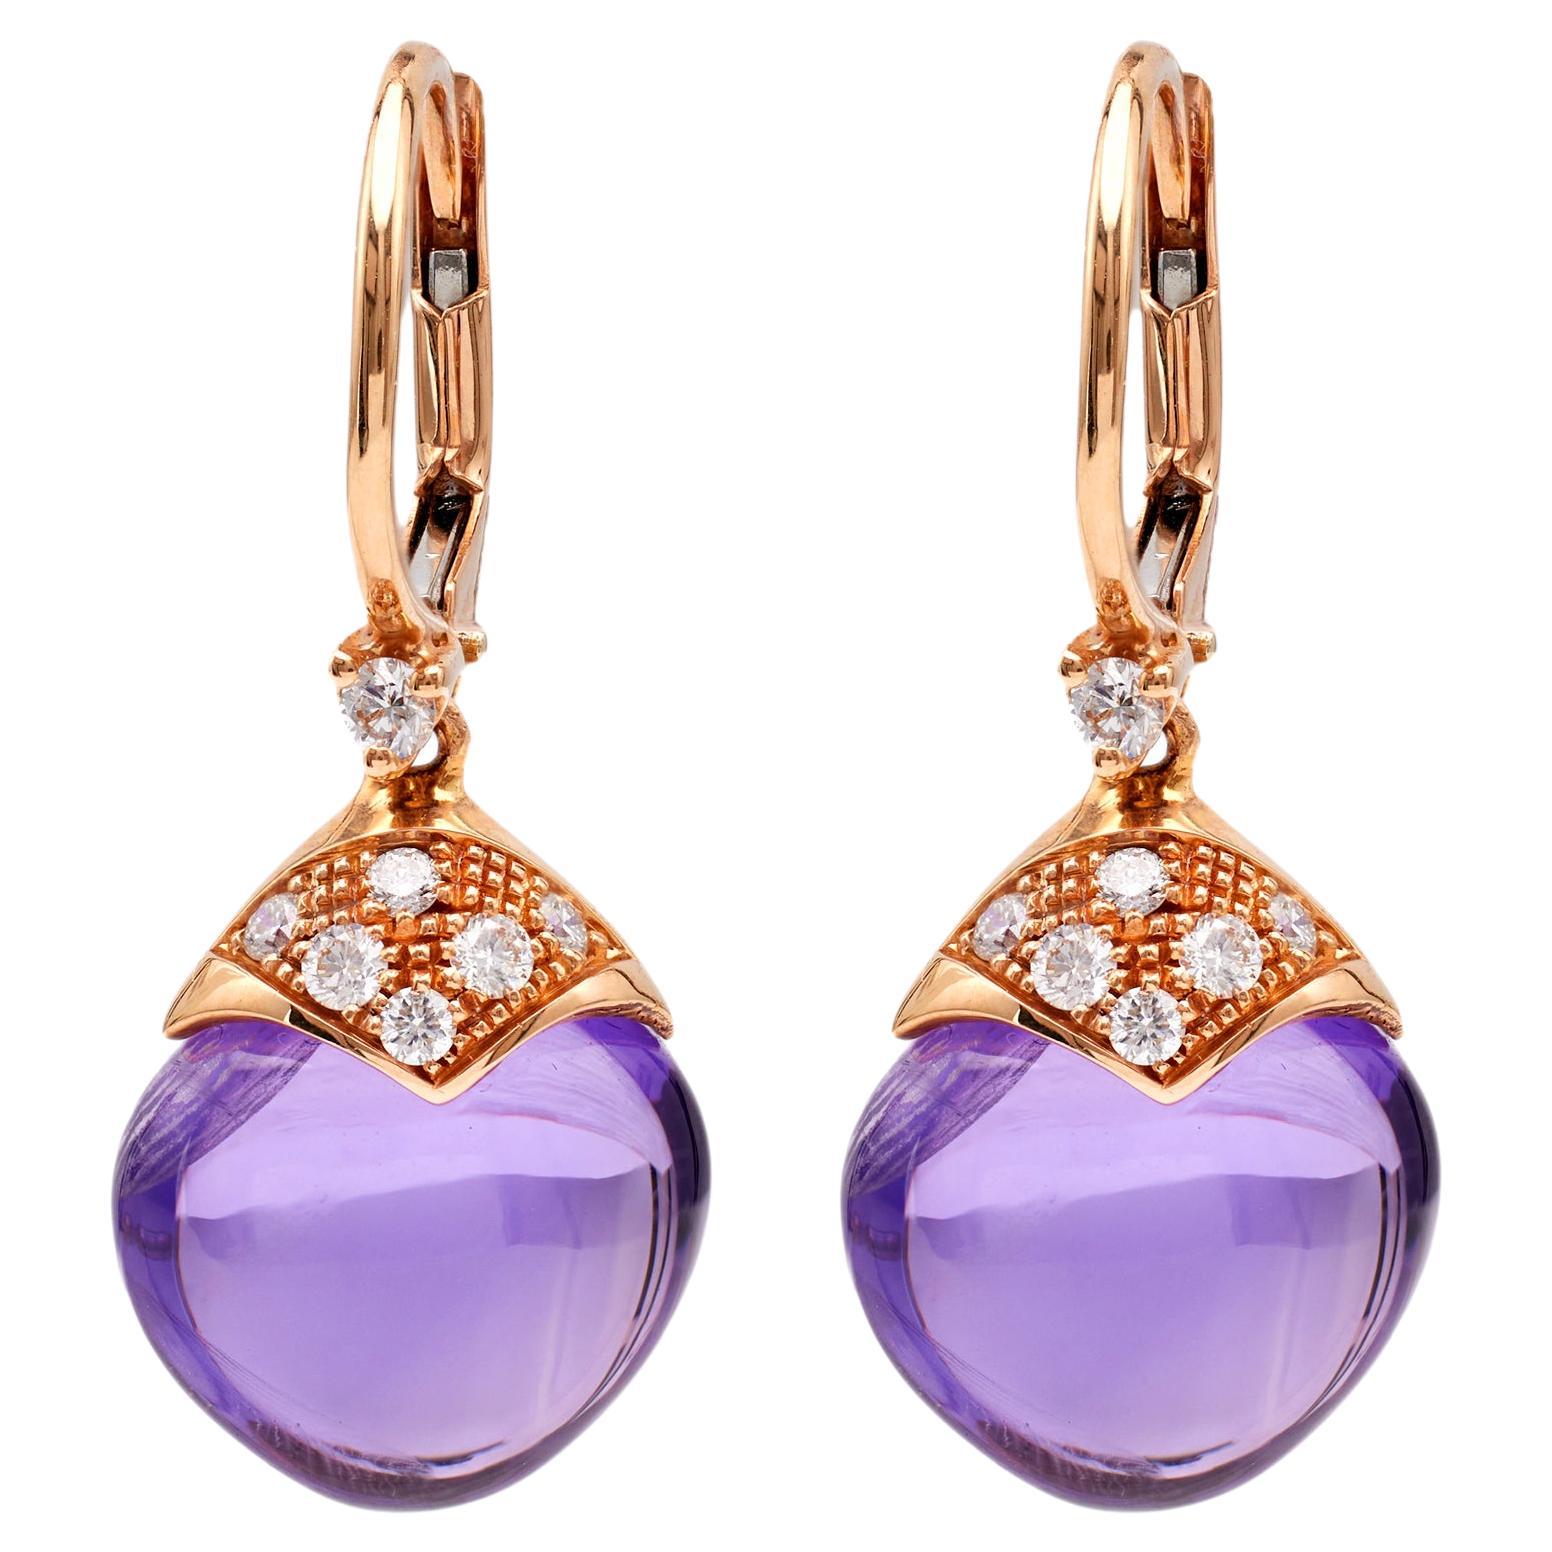 Vintage Italy Amethyst and Diamond 18k Rose Gold Earrings